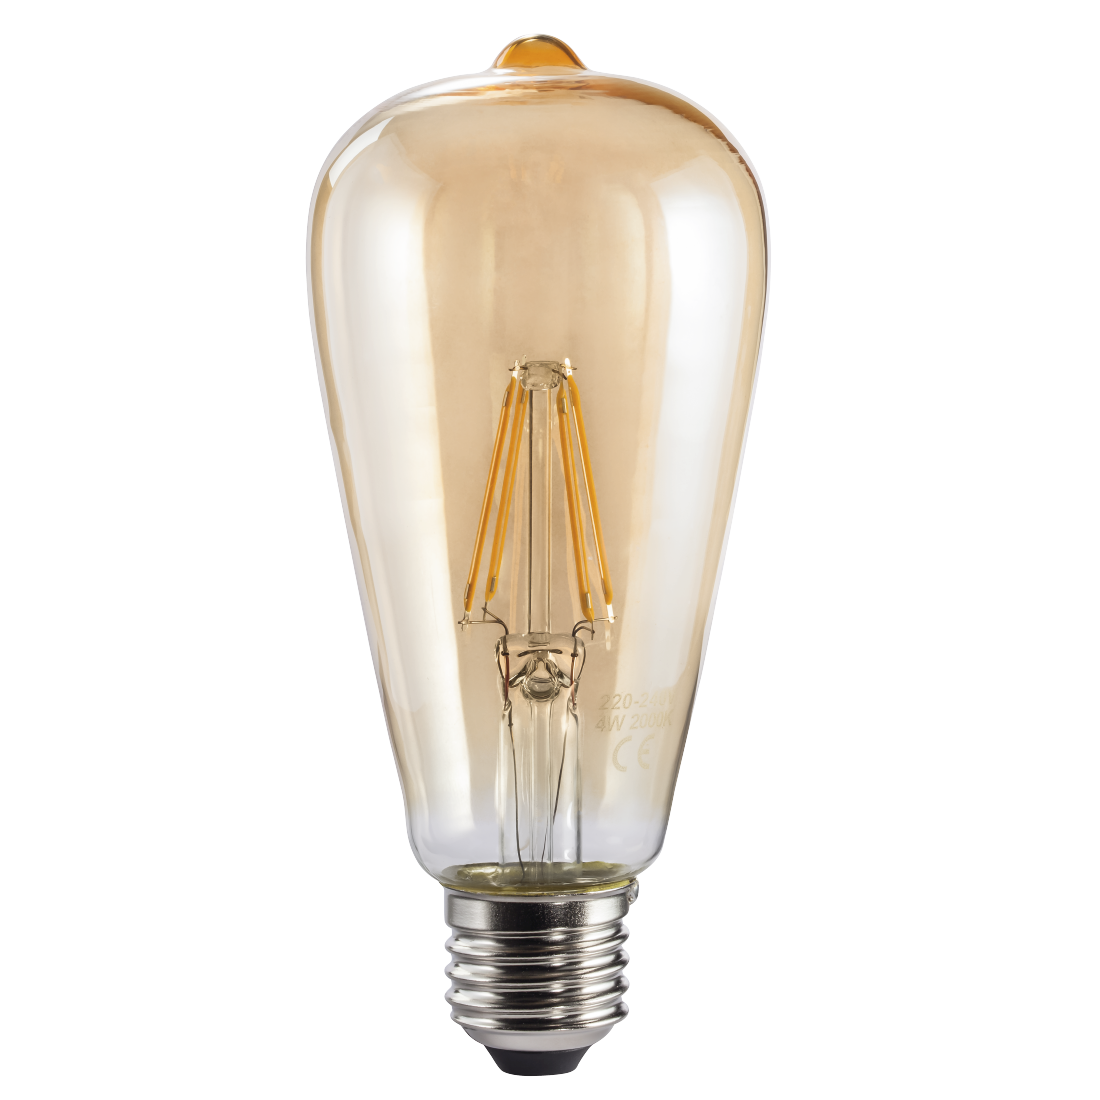 abx High-Res Image - Xavax, LED Filament, E27, 410 lm Replaces 36 W, Vintage Bulb, amber, warm white